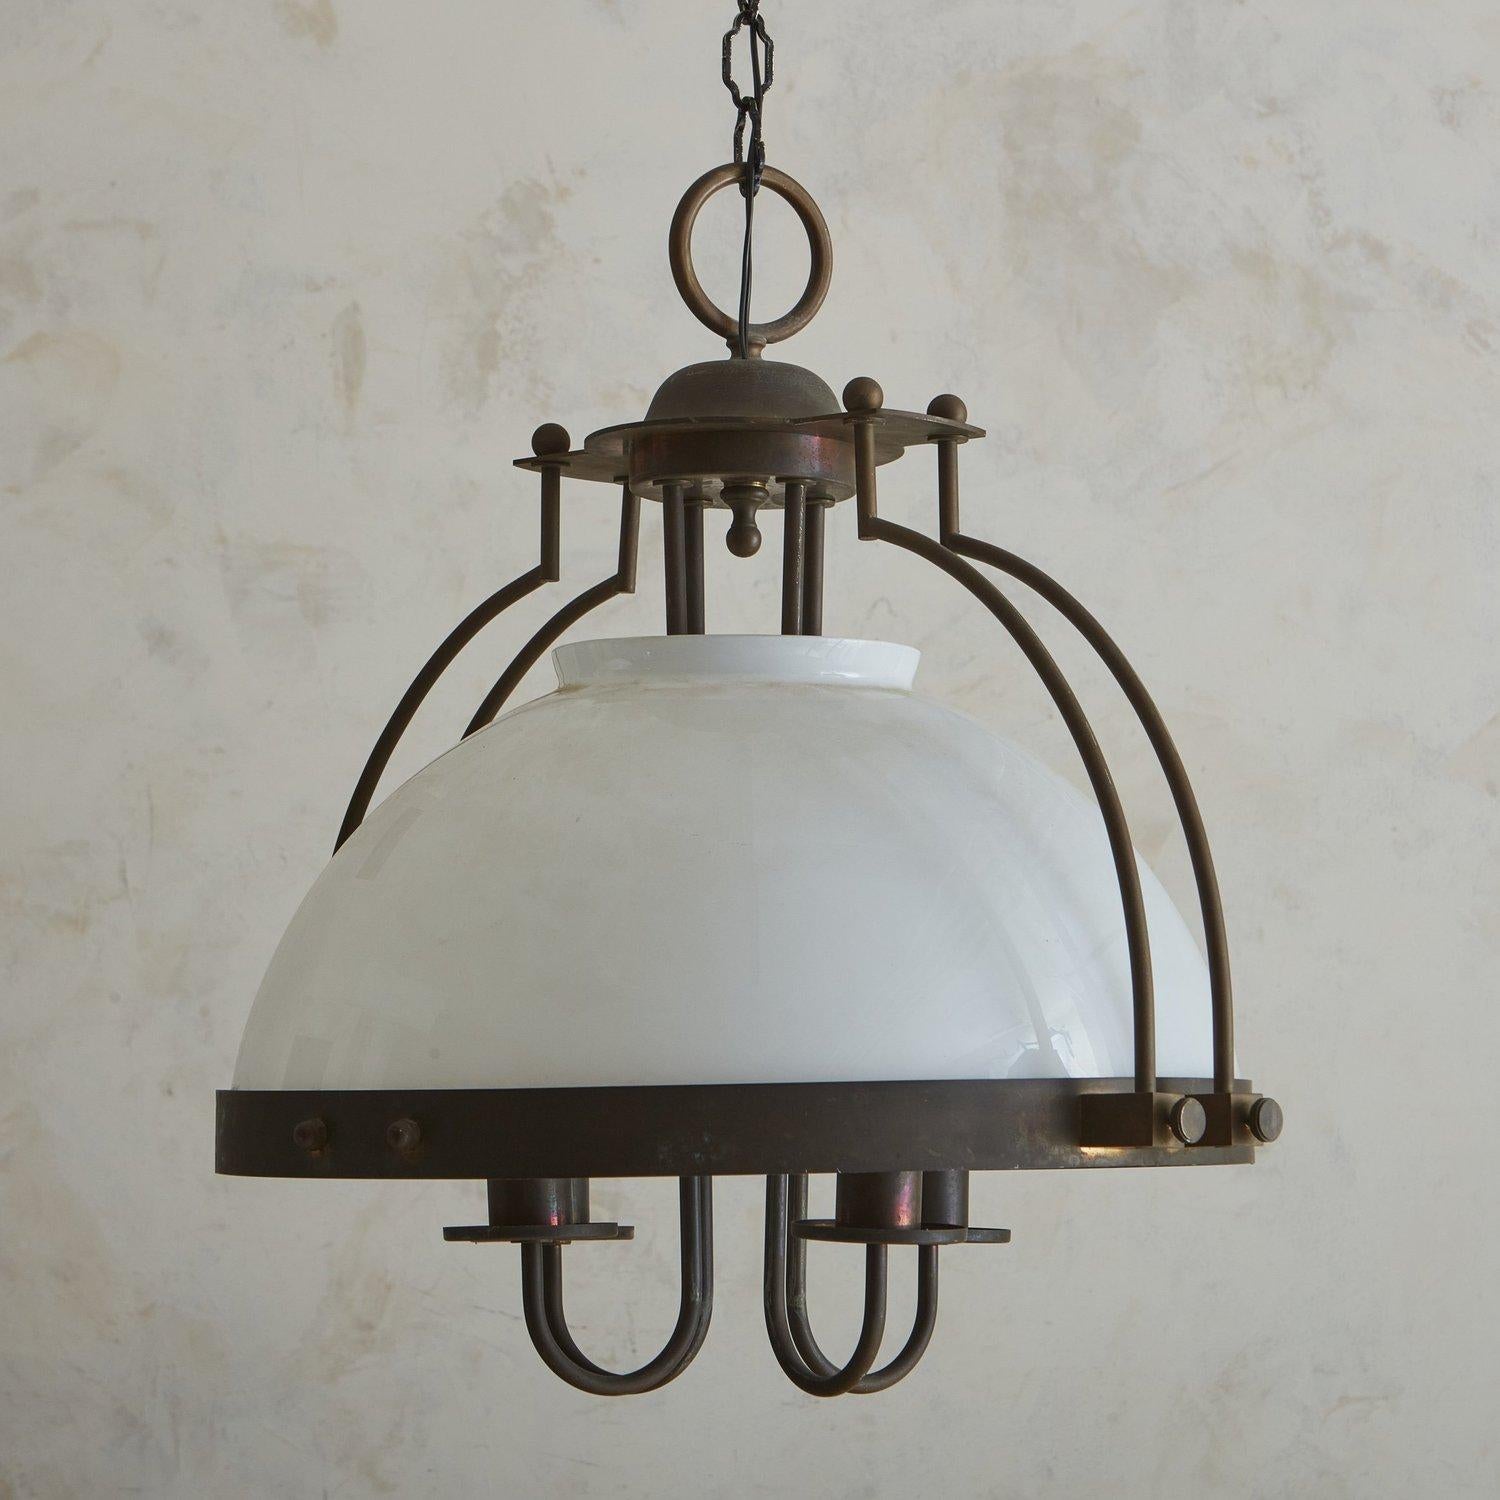 A 1970s French pendant light featuring an opaline glass dome shade, which is suspended from a patinated bronze cage frame. The frame has elegant curves, spherical finial details and industrial hardware. Four tubular, curved arms with bobeches hang